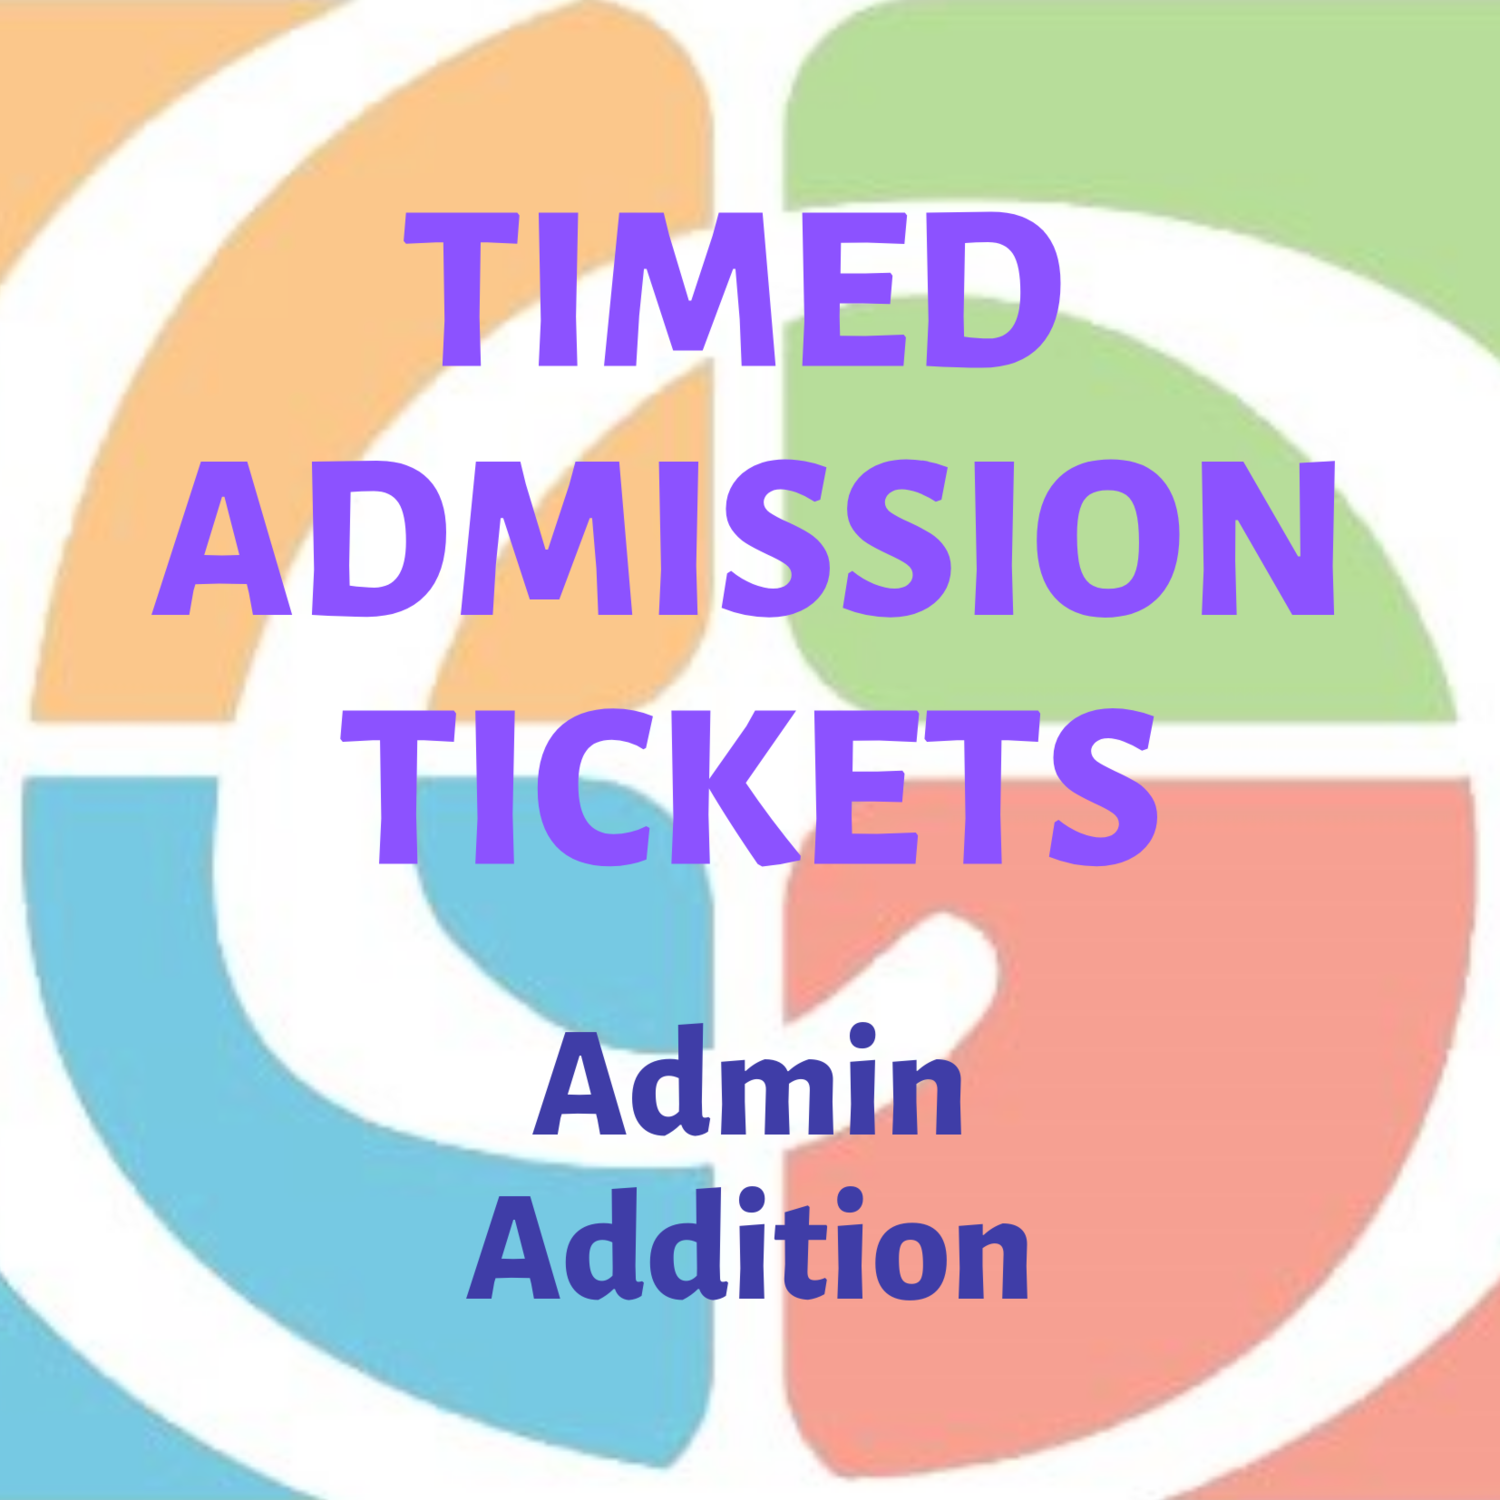 Timed Admission Tickets - Admin Addition